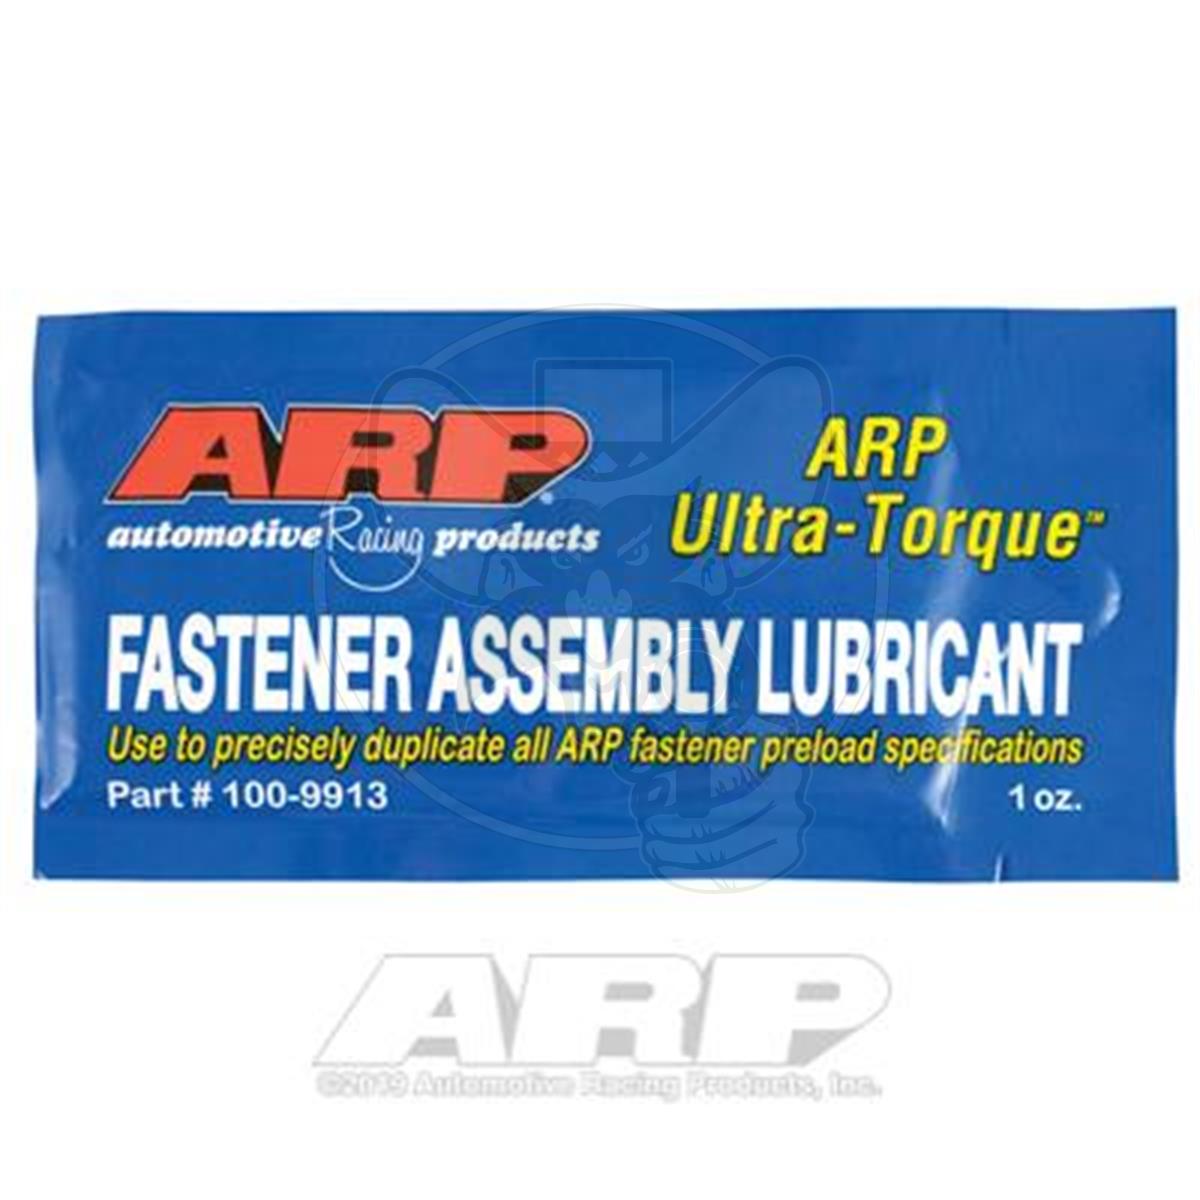 ARP ULTRA TORQUE FASTENER ASSEMBLY LUBRICANT 1.0 OUNCE